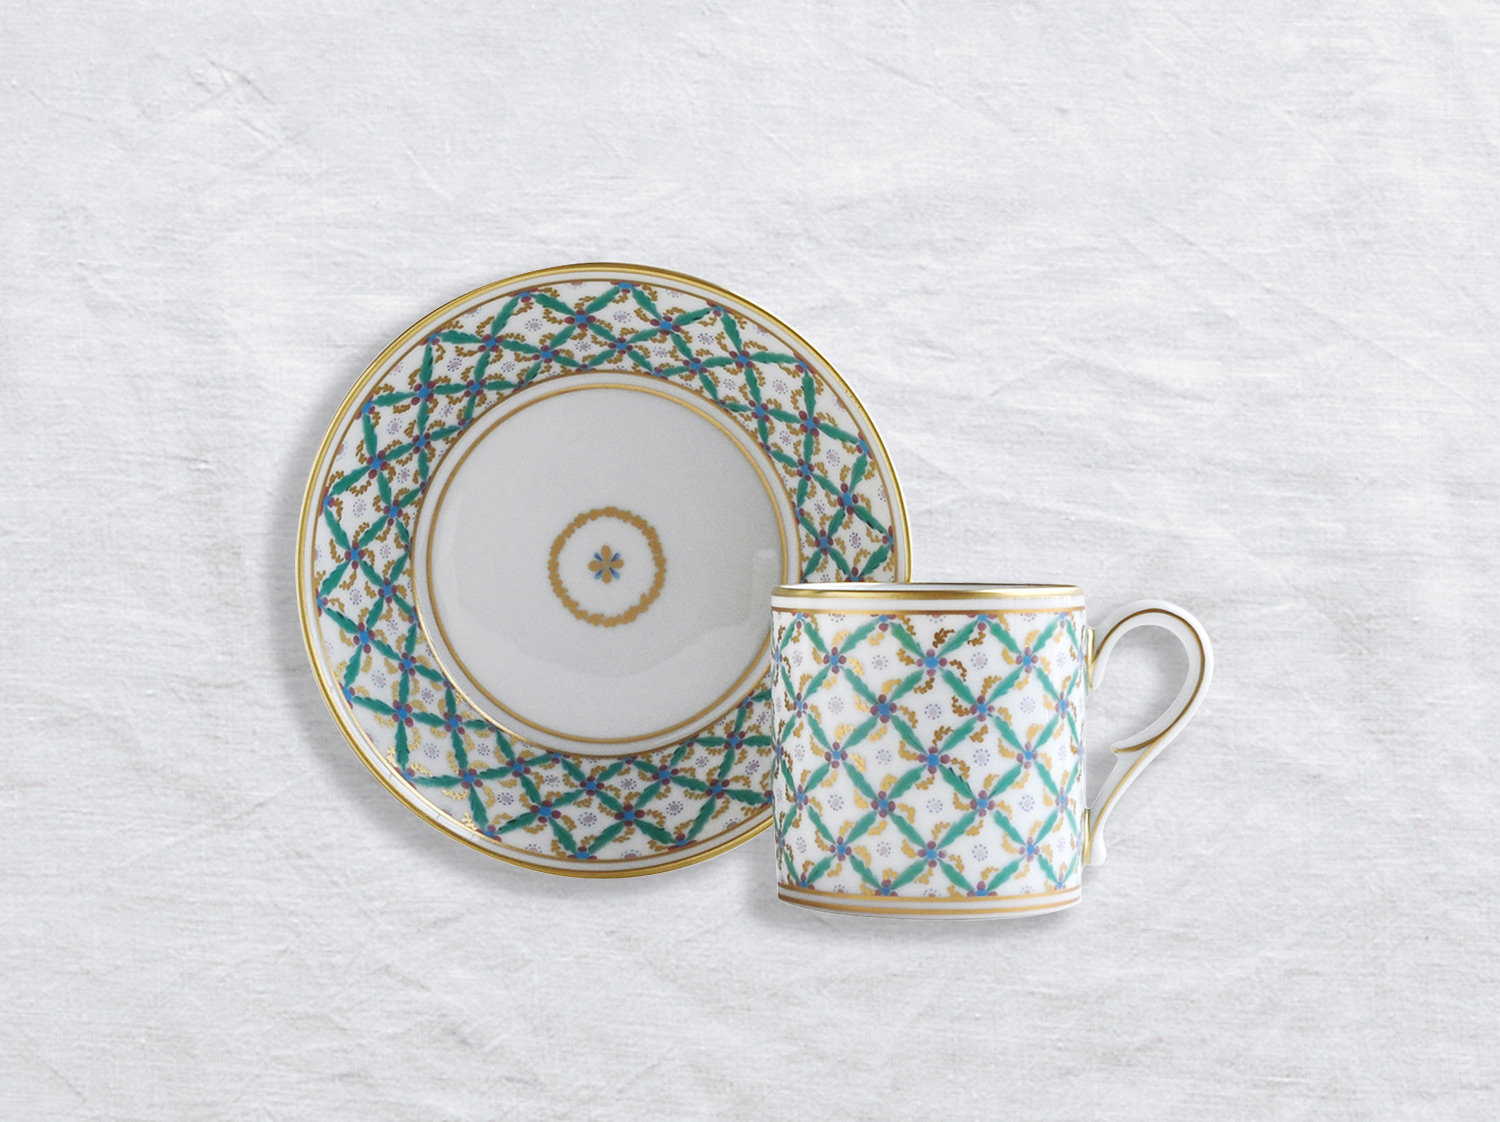 China Litron cup and saucer of the collection Quadrille vert | Bernardaud